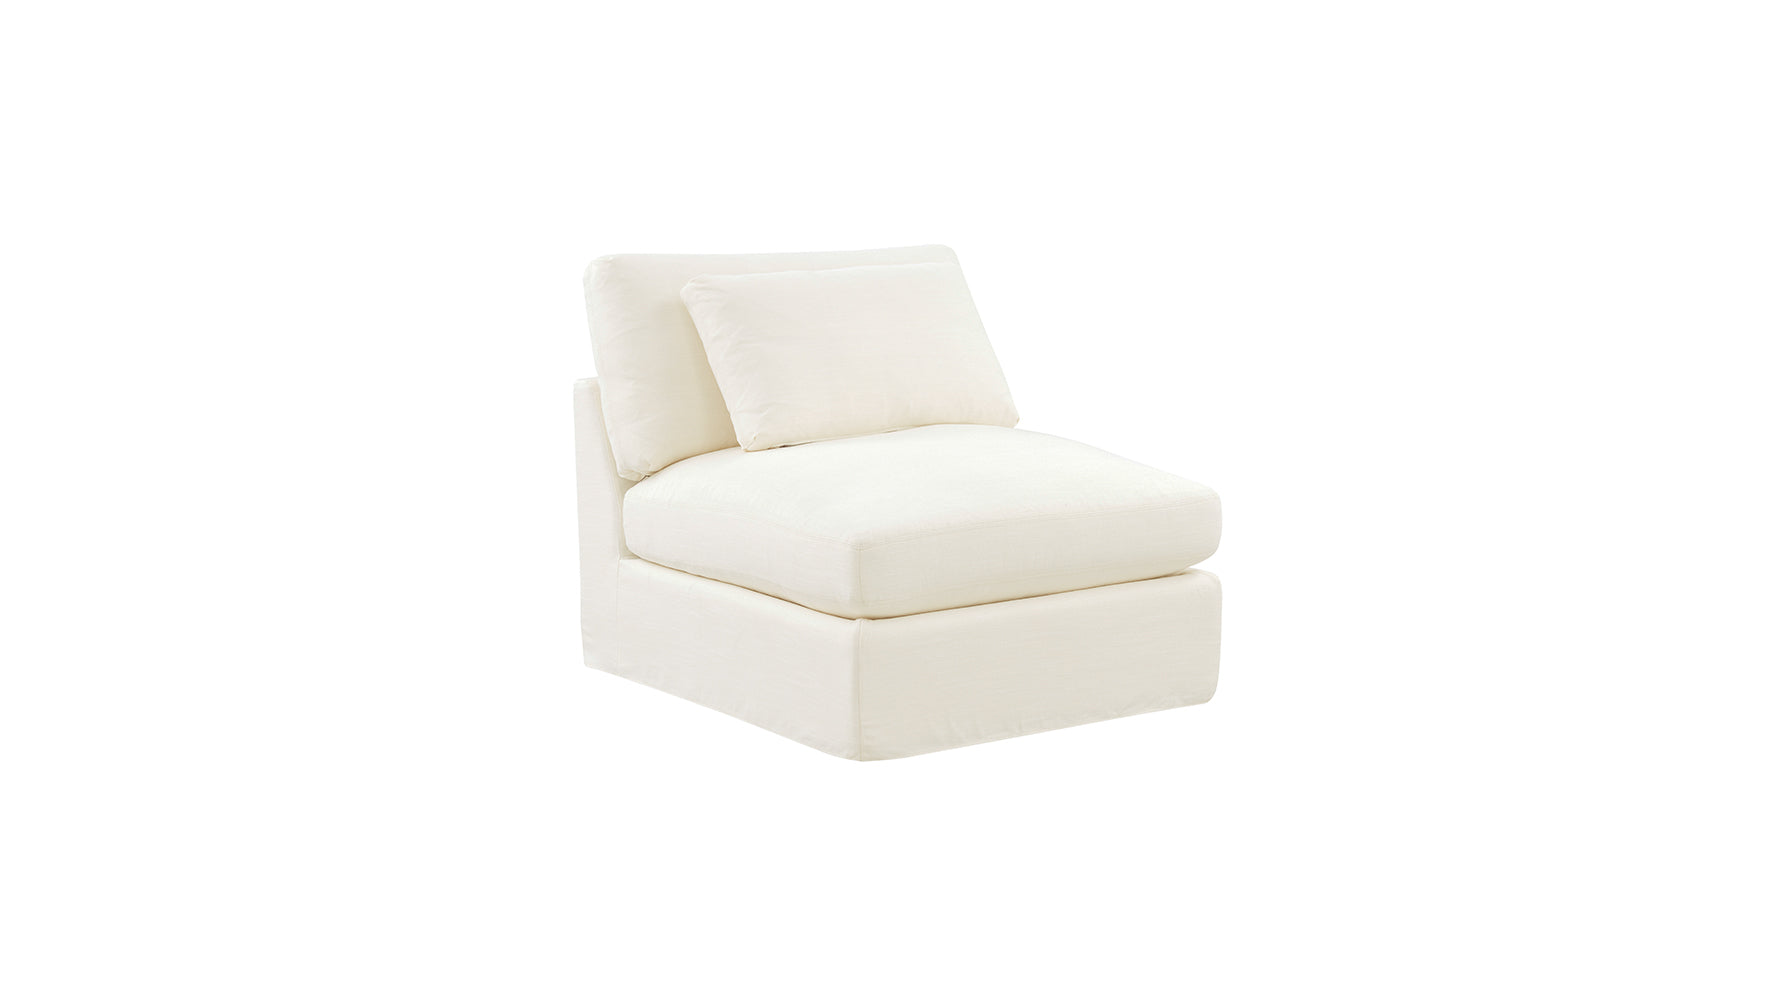 Get Together™ Armless Chair, Large, Cream Linen - Image 2